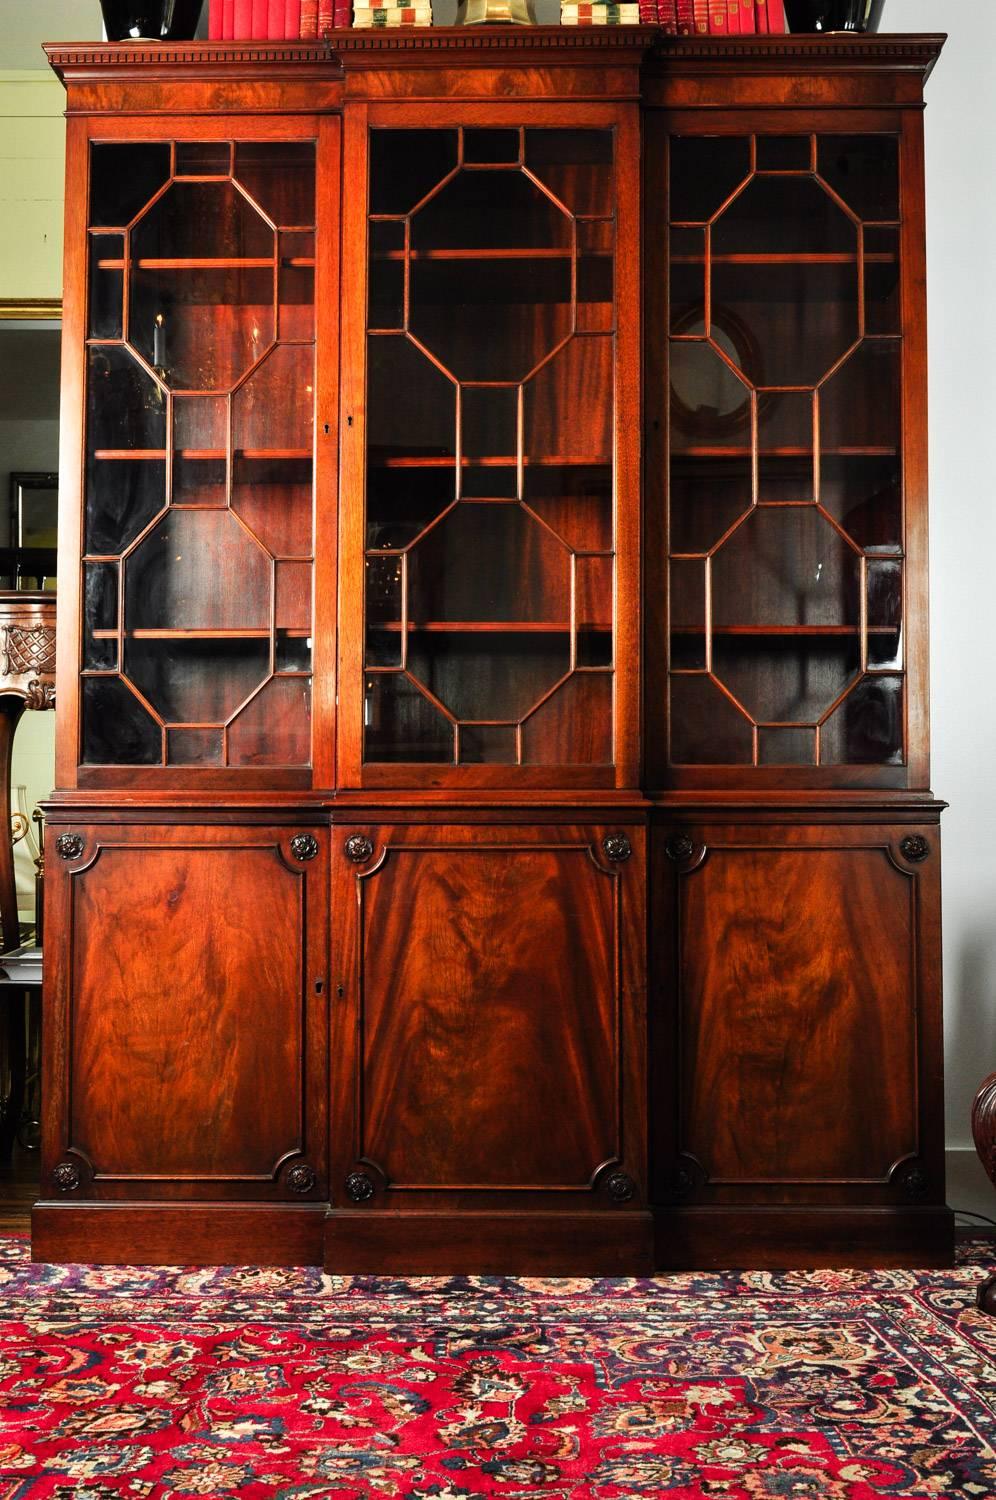 Late 18th-early 19th century mahogany wood American two pieces china cabinet / hutch. The piece is in great condition with some age appropriate wear. The hutch measures 79 inches high x 58 inches wide x 12 inches deep.
    